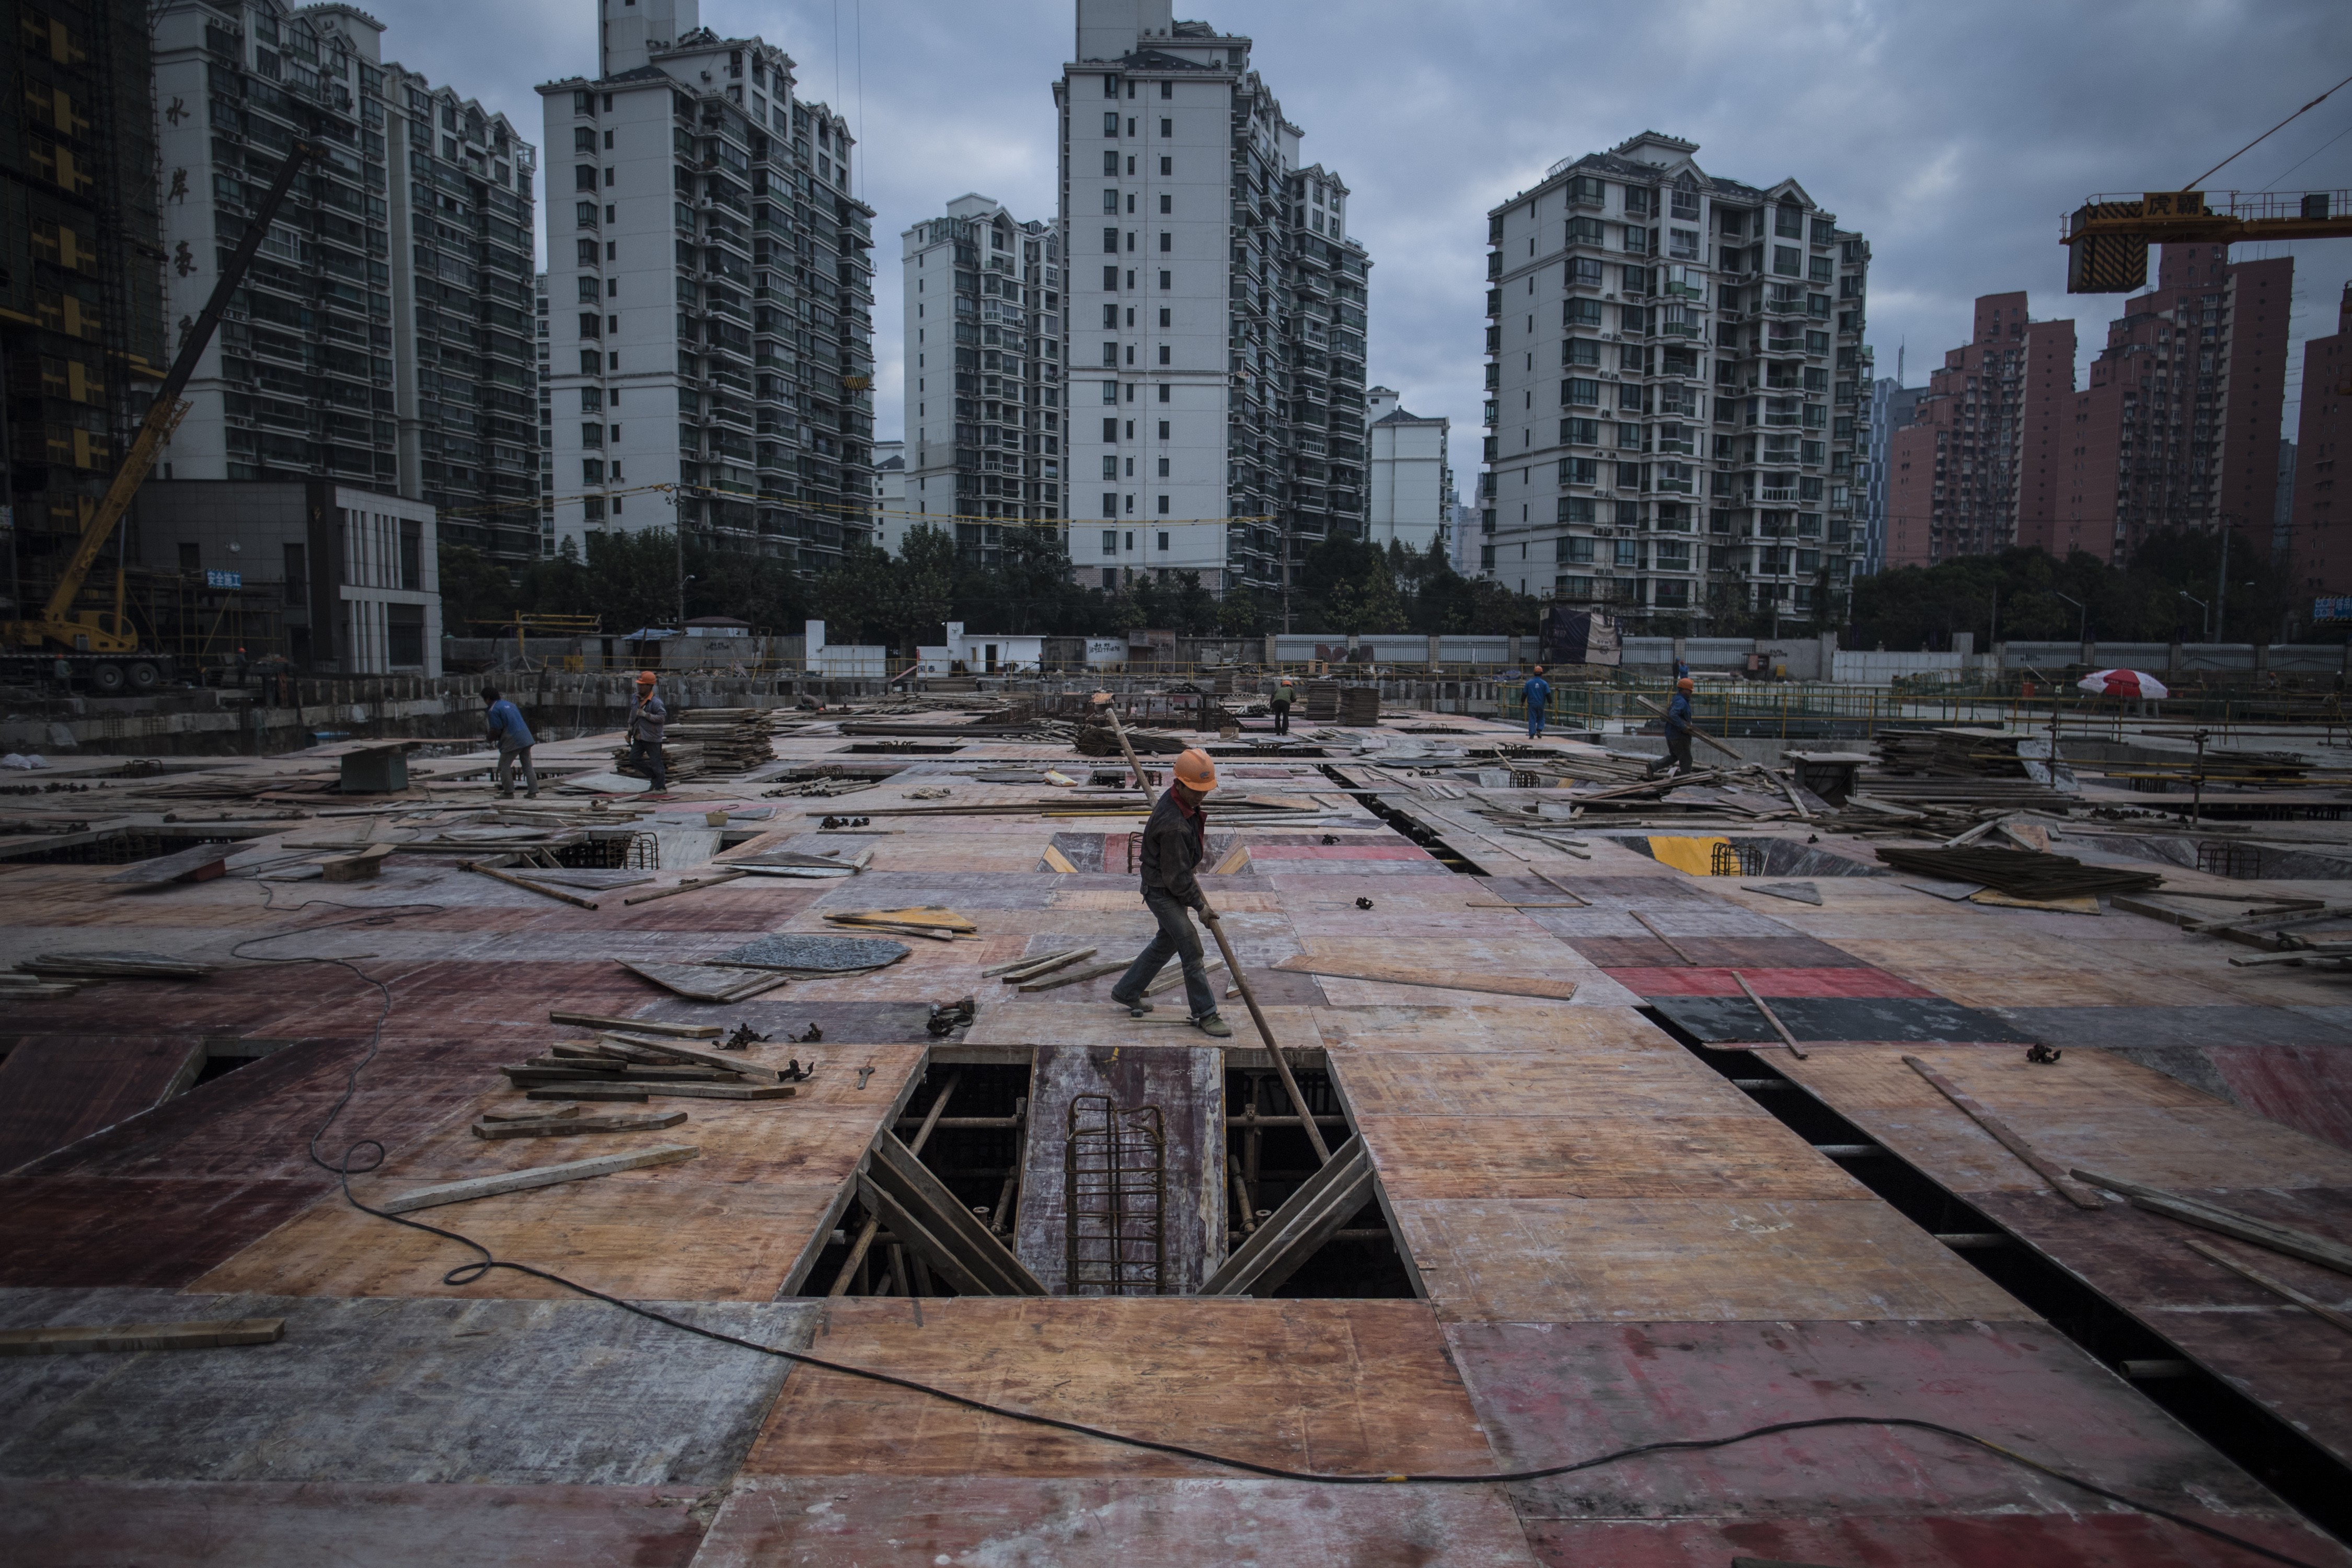 Forget the trade war. Chinese companies, including real estate firms, face other challenges like government regulation of borrowing. Photo: AFP